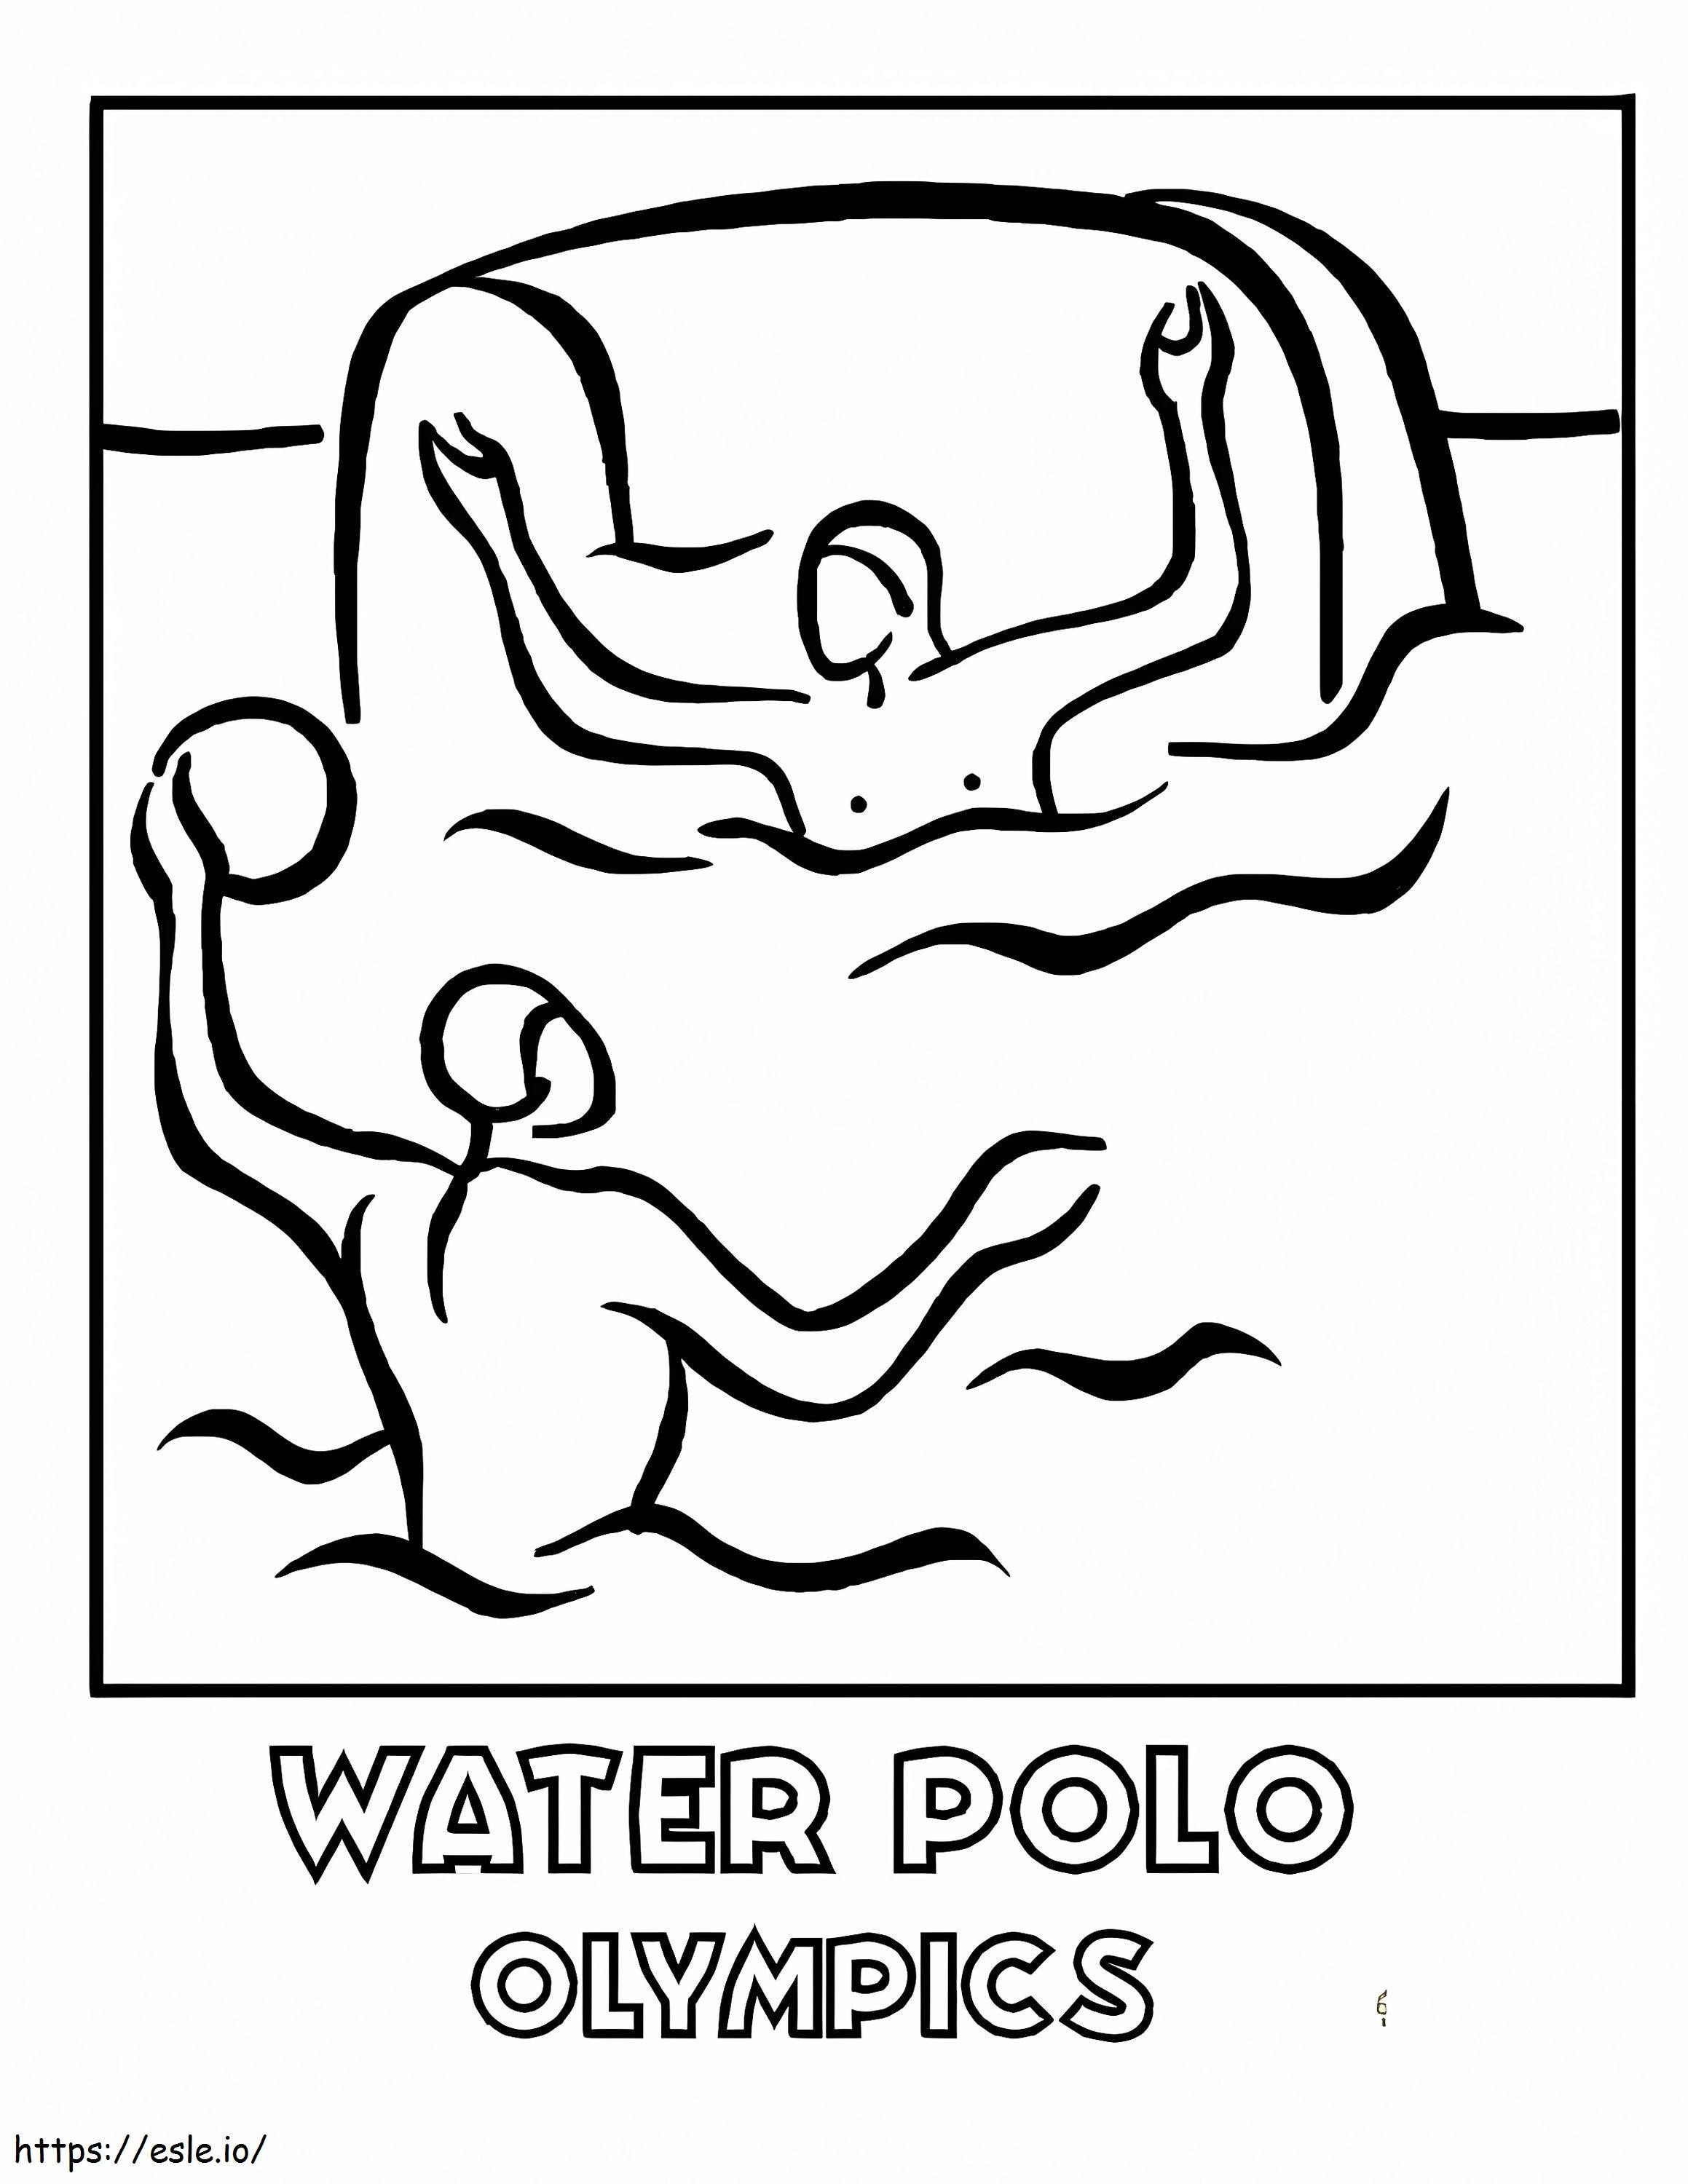 Olympics Water Polo coloring page